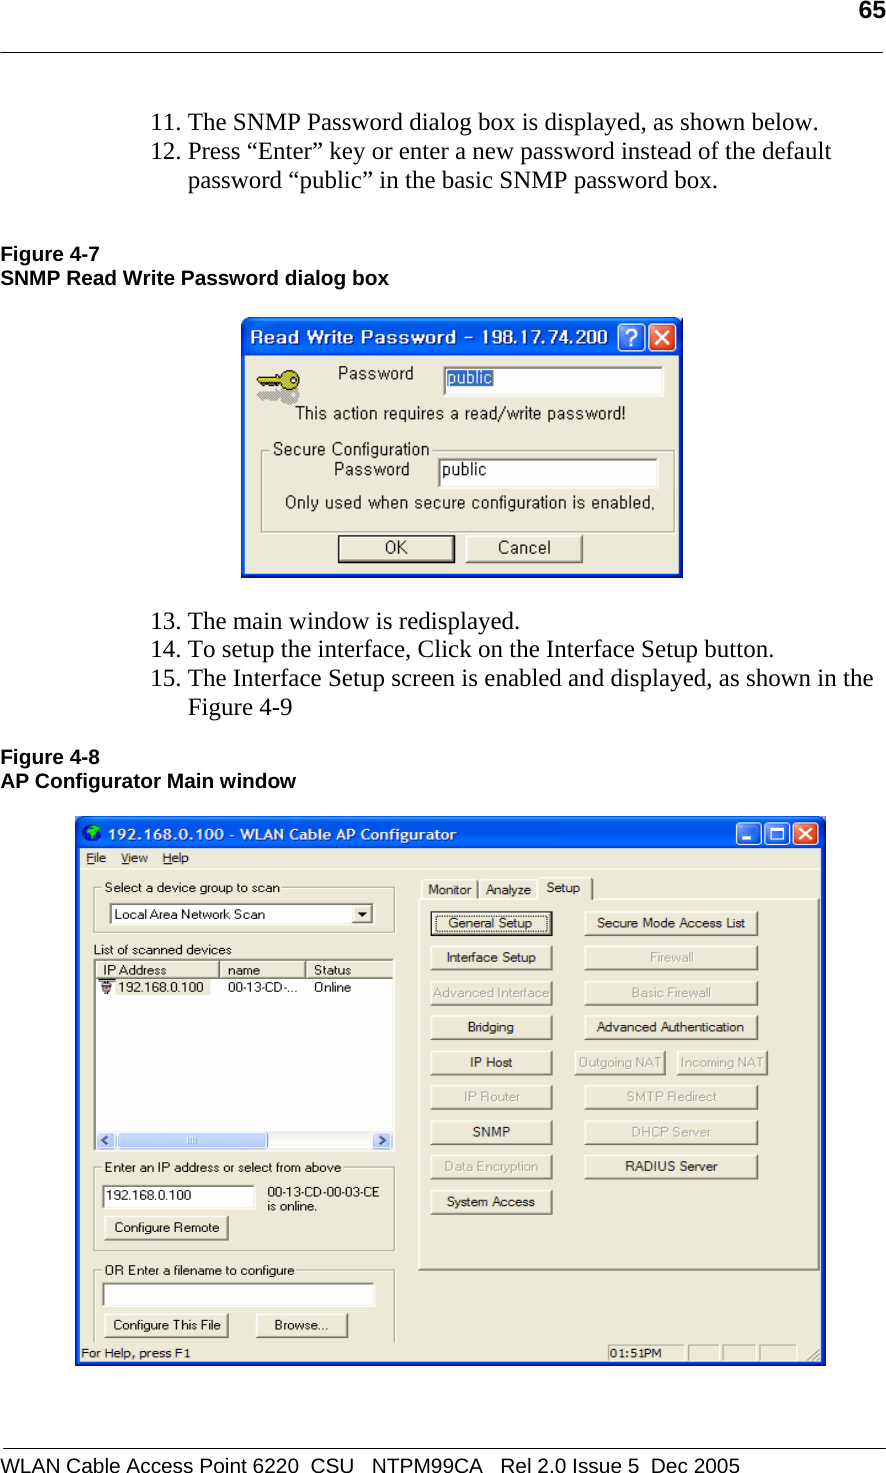   65  WLAN Cable Access Point 6220  CSU   NTPM99CA   Rel 2.0 Issue 5  Dec 2005 11. The SNMP Password dialog box is displayed, as shown below. 12. Press “Enter” key or enter a new password instead of the default password “public” in the basic SNMP password box.    Figure 4-7 SNMP Read Write Password dialog box    13. The main window is redisplayed.  14. To setup the interface, Click on the Interface Setup button.  15. The Interface Setup screen is enabled and displayed, as shown in the Figure 4-9  Figure 4-8  AP Configurator Main window    